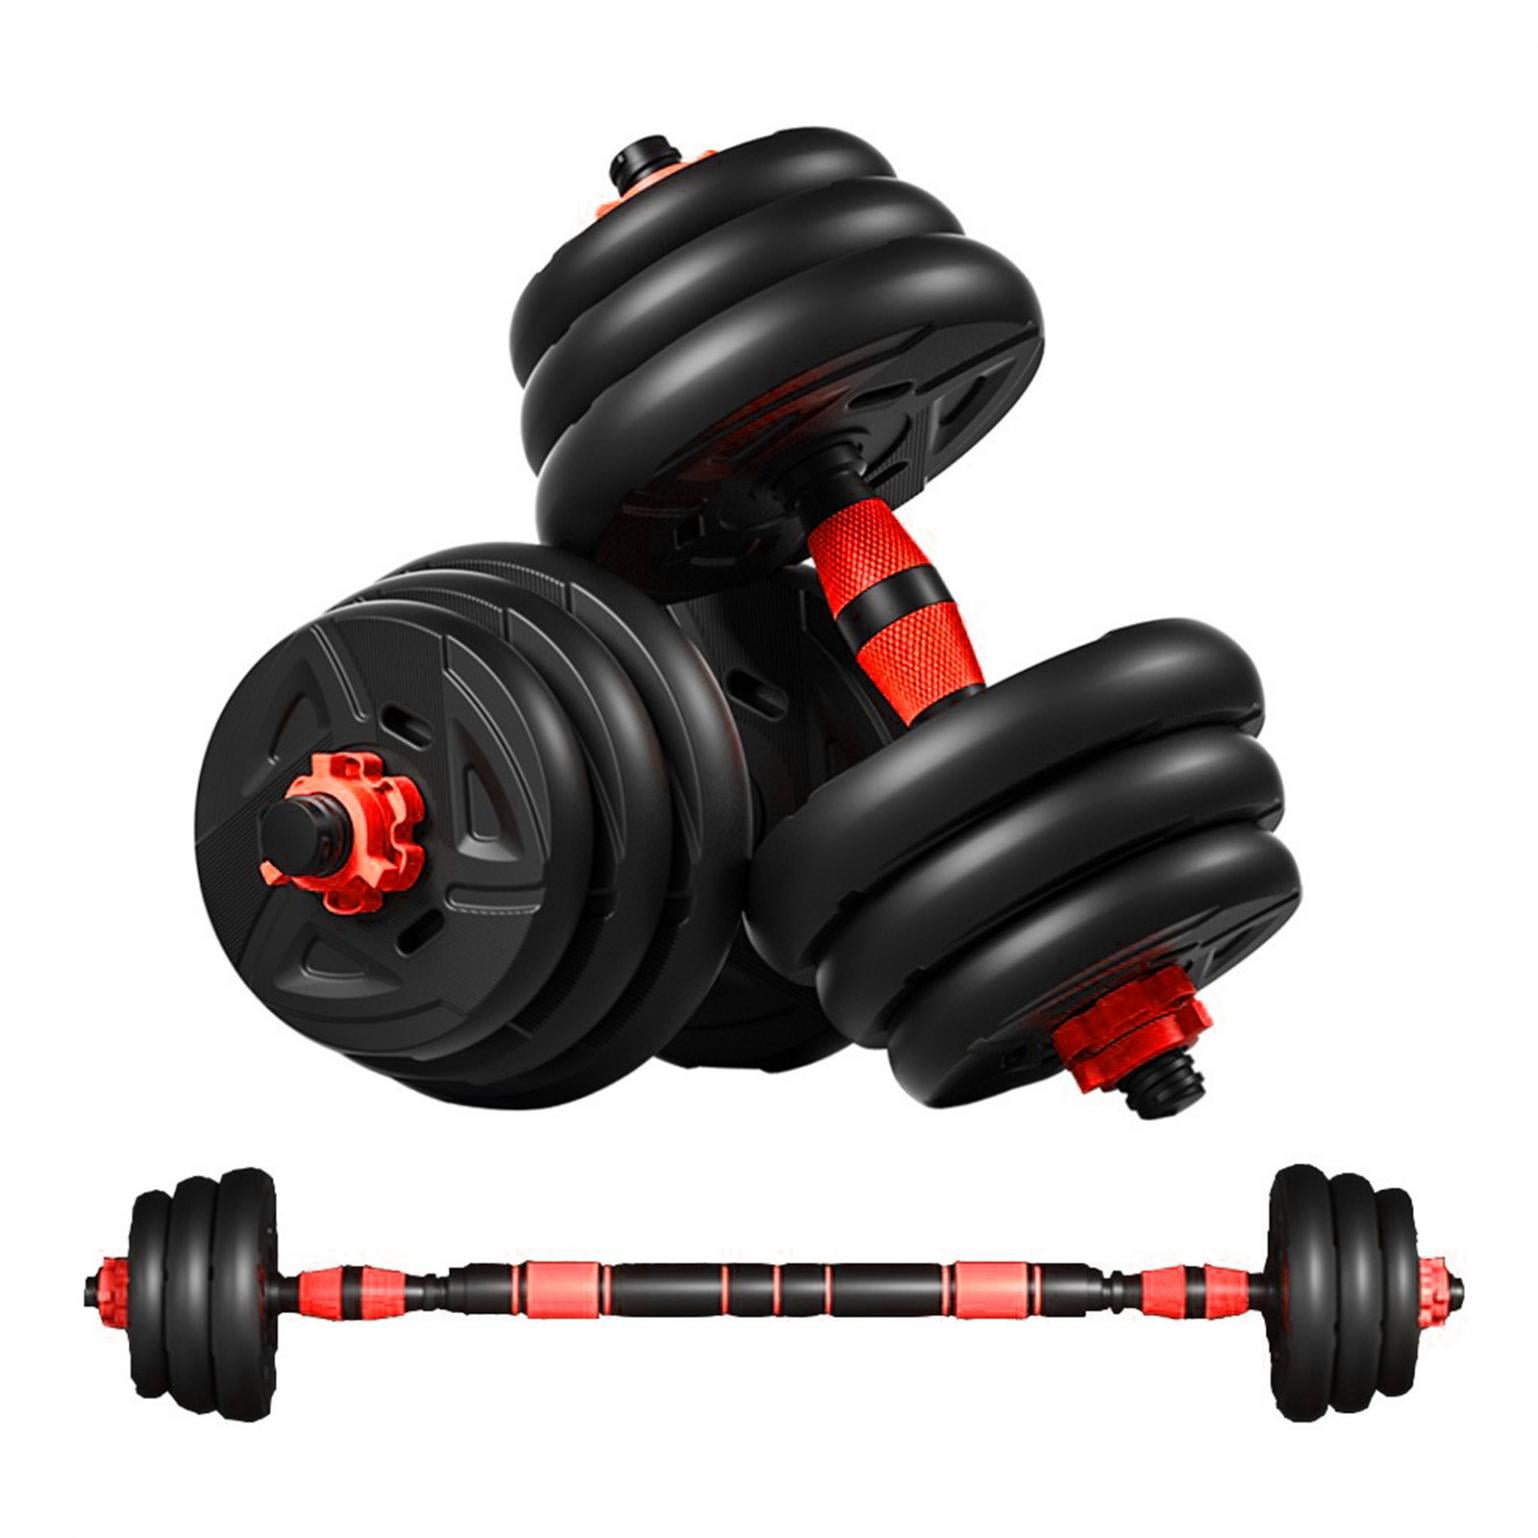 Totall 44/66/88LB Weight Dumbbell Set Adjustable Gym Barbell Plates Body Workout 